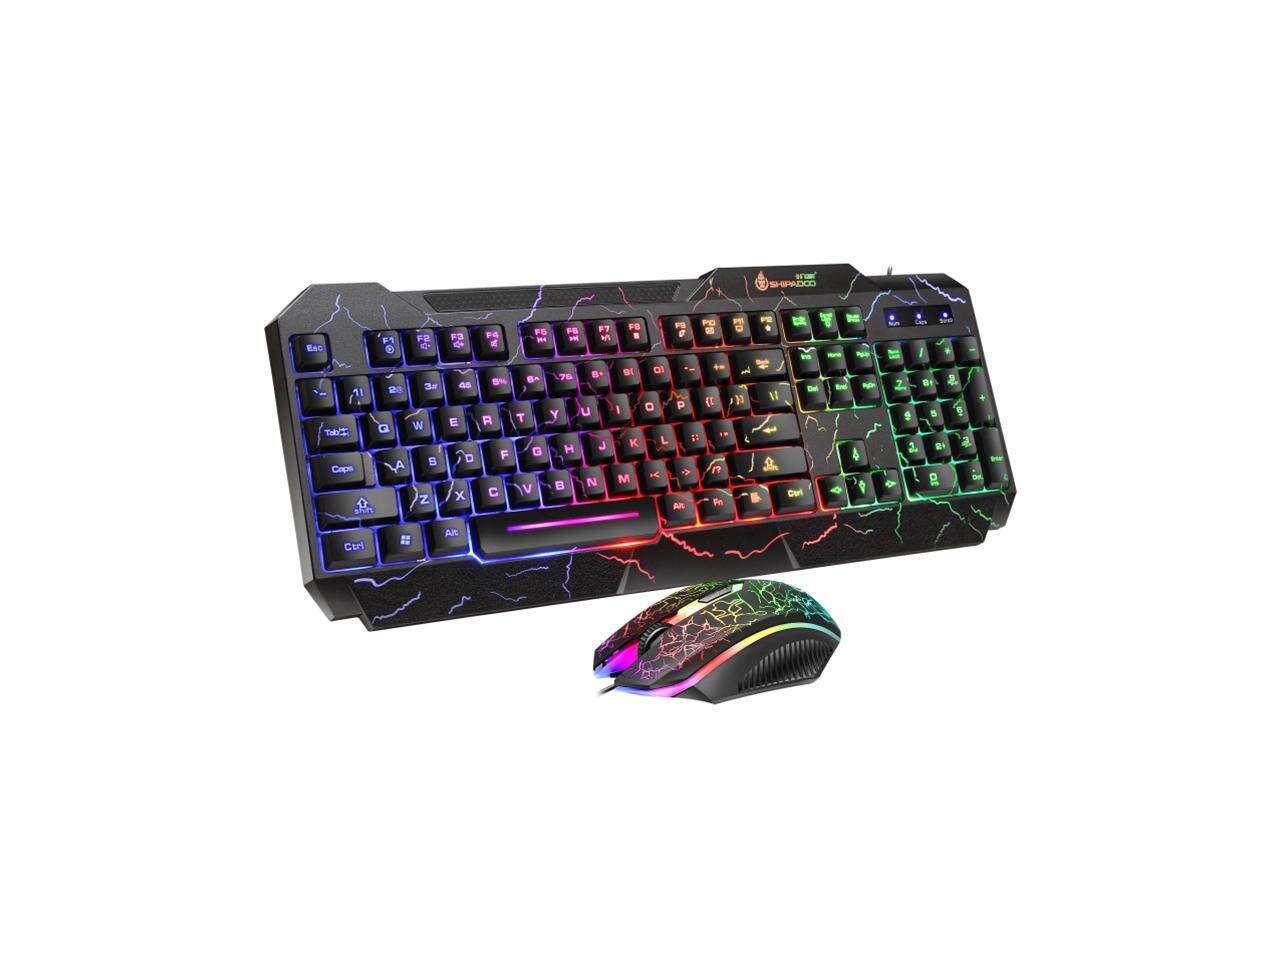 SHIPADOO D620 104-key Wired RGB Color Cracked Backlight Gaming Keyboard Mouse Kit for Laptop, PC Wired Keyboard